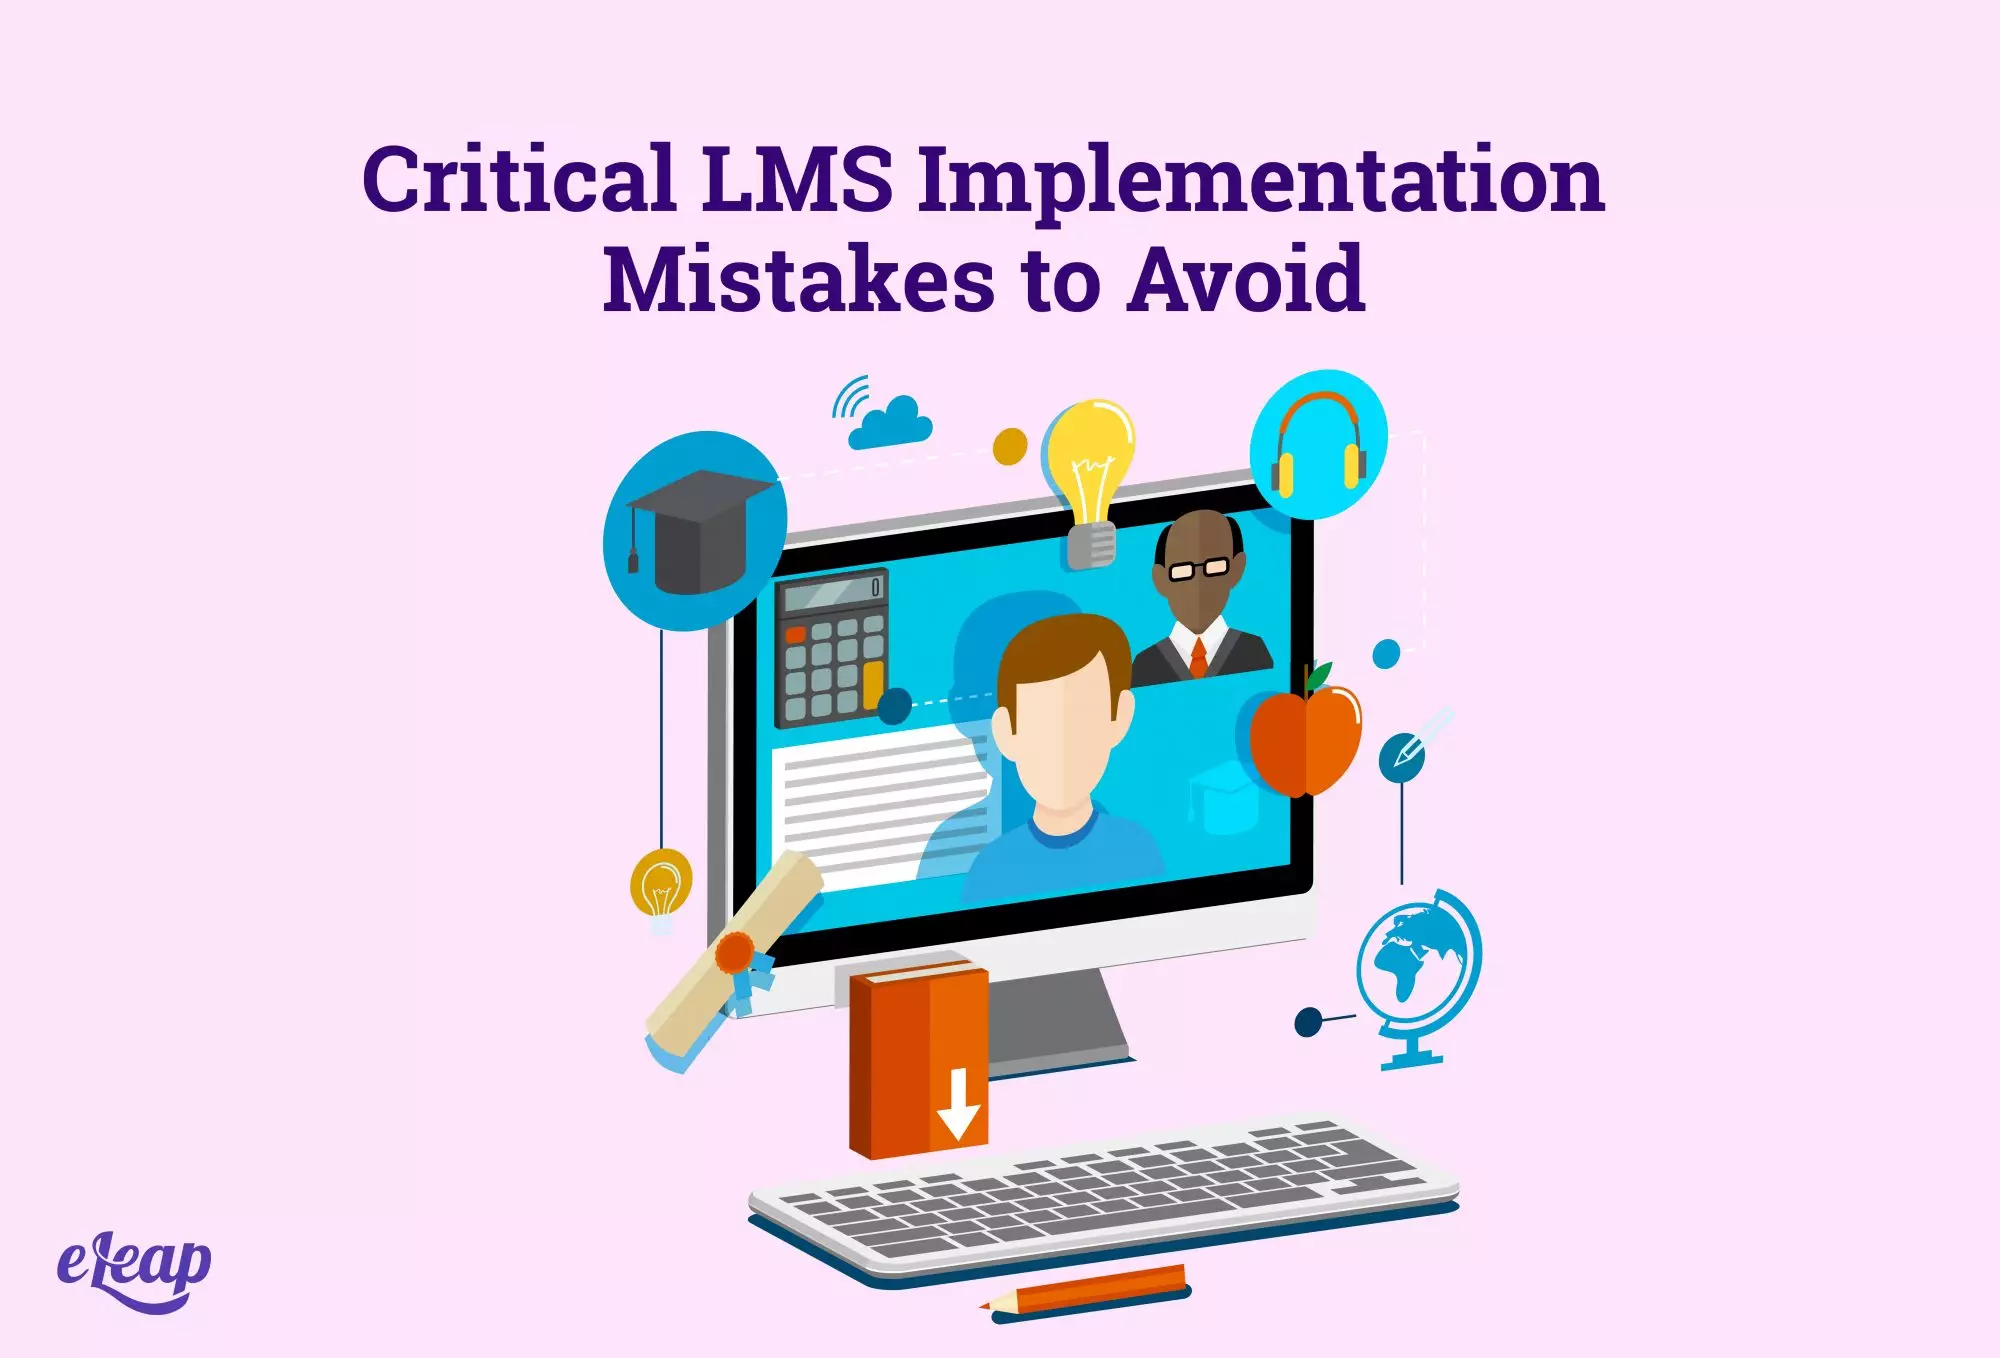 Critical LMS Implementation Mistakes to Avoid